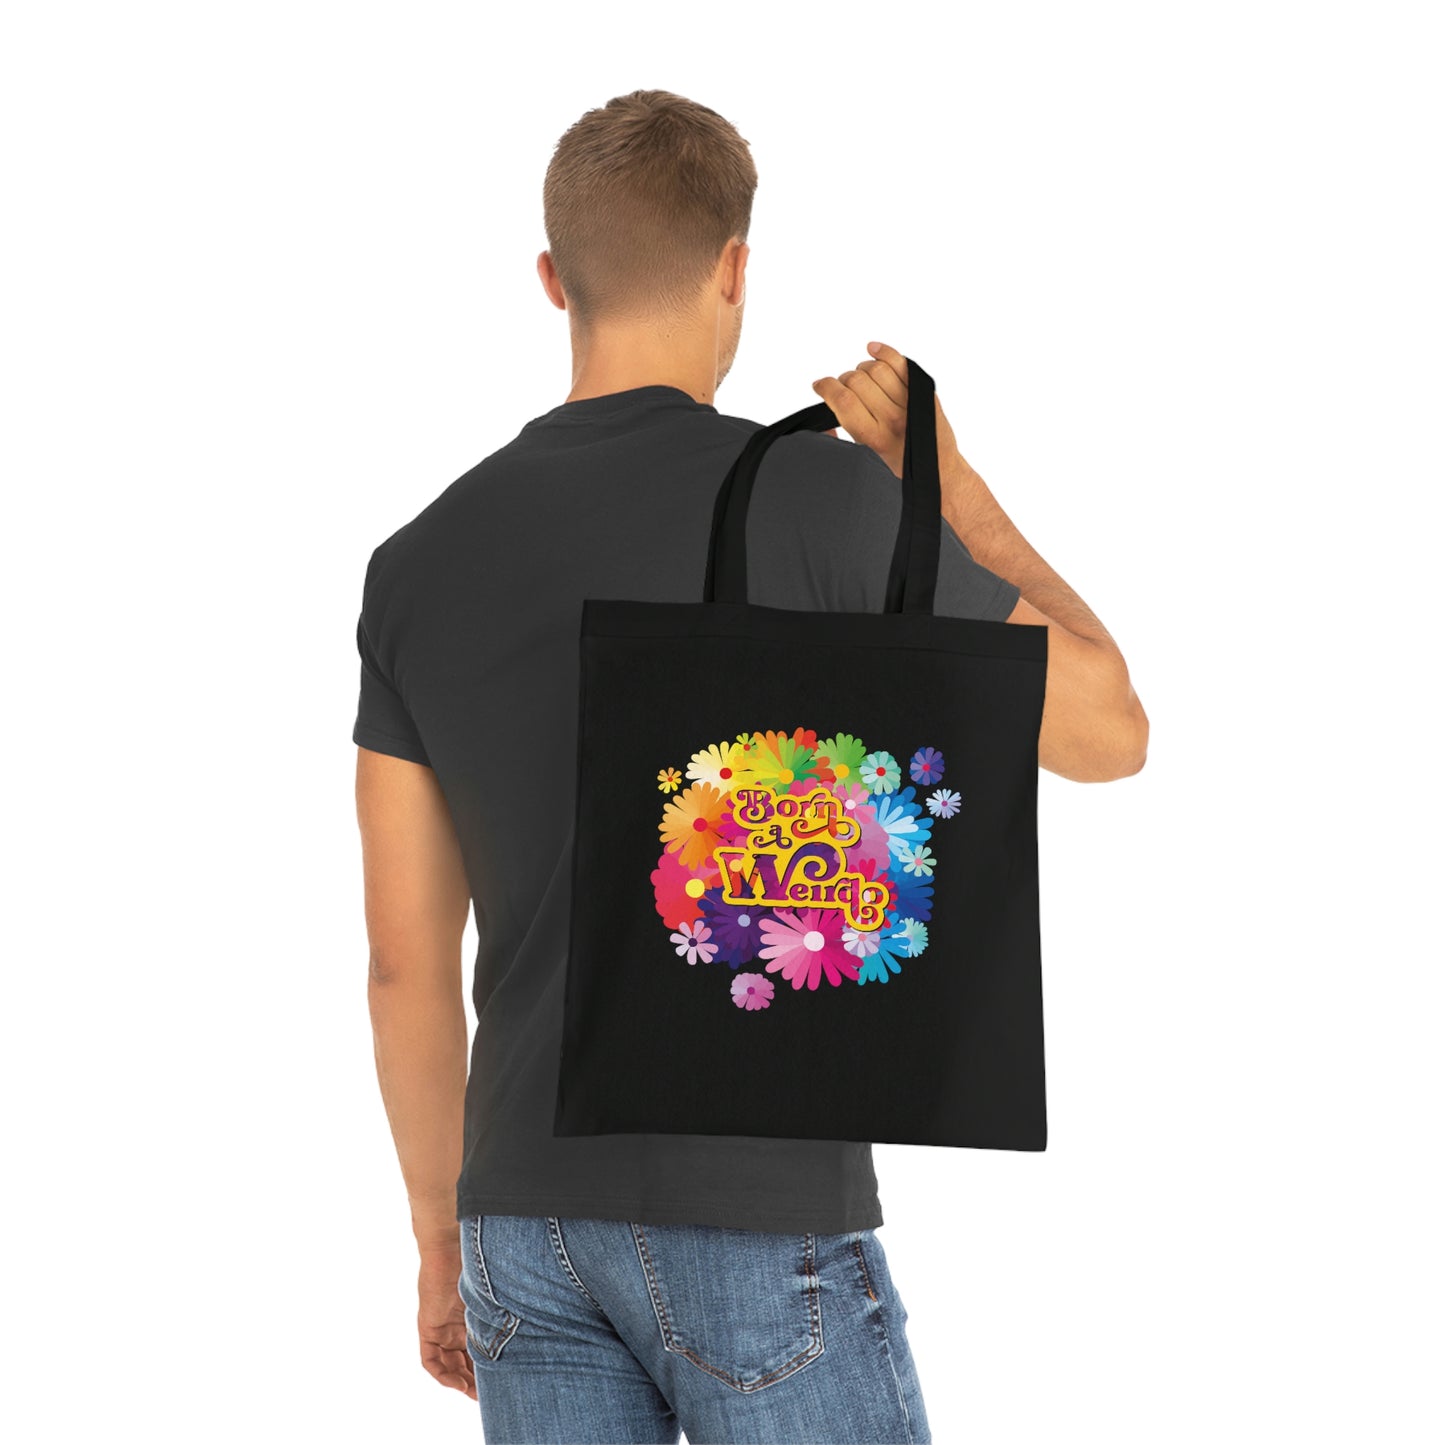 Weirdo | This 100% cotton tote bag for weirdos has our funny meme: Born a Weirdo printed at the front of the cotton bag in colorful flowers.